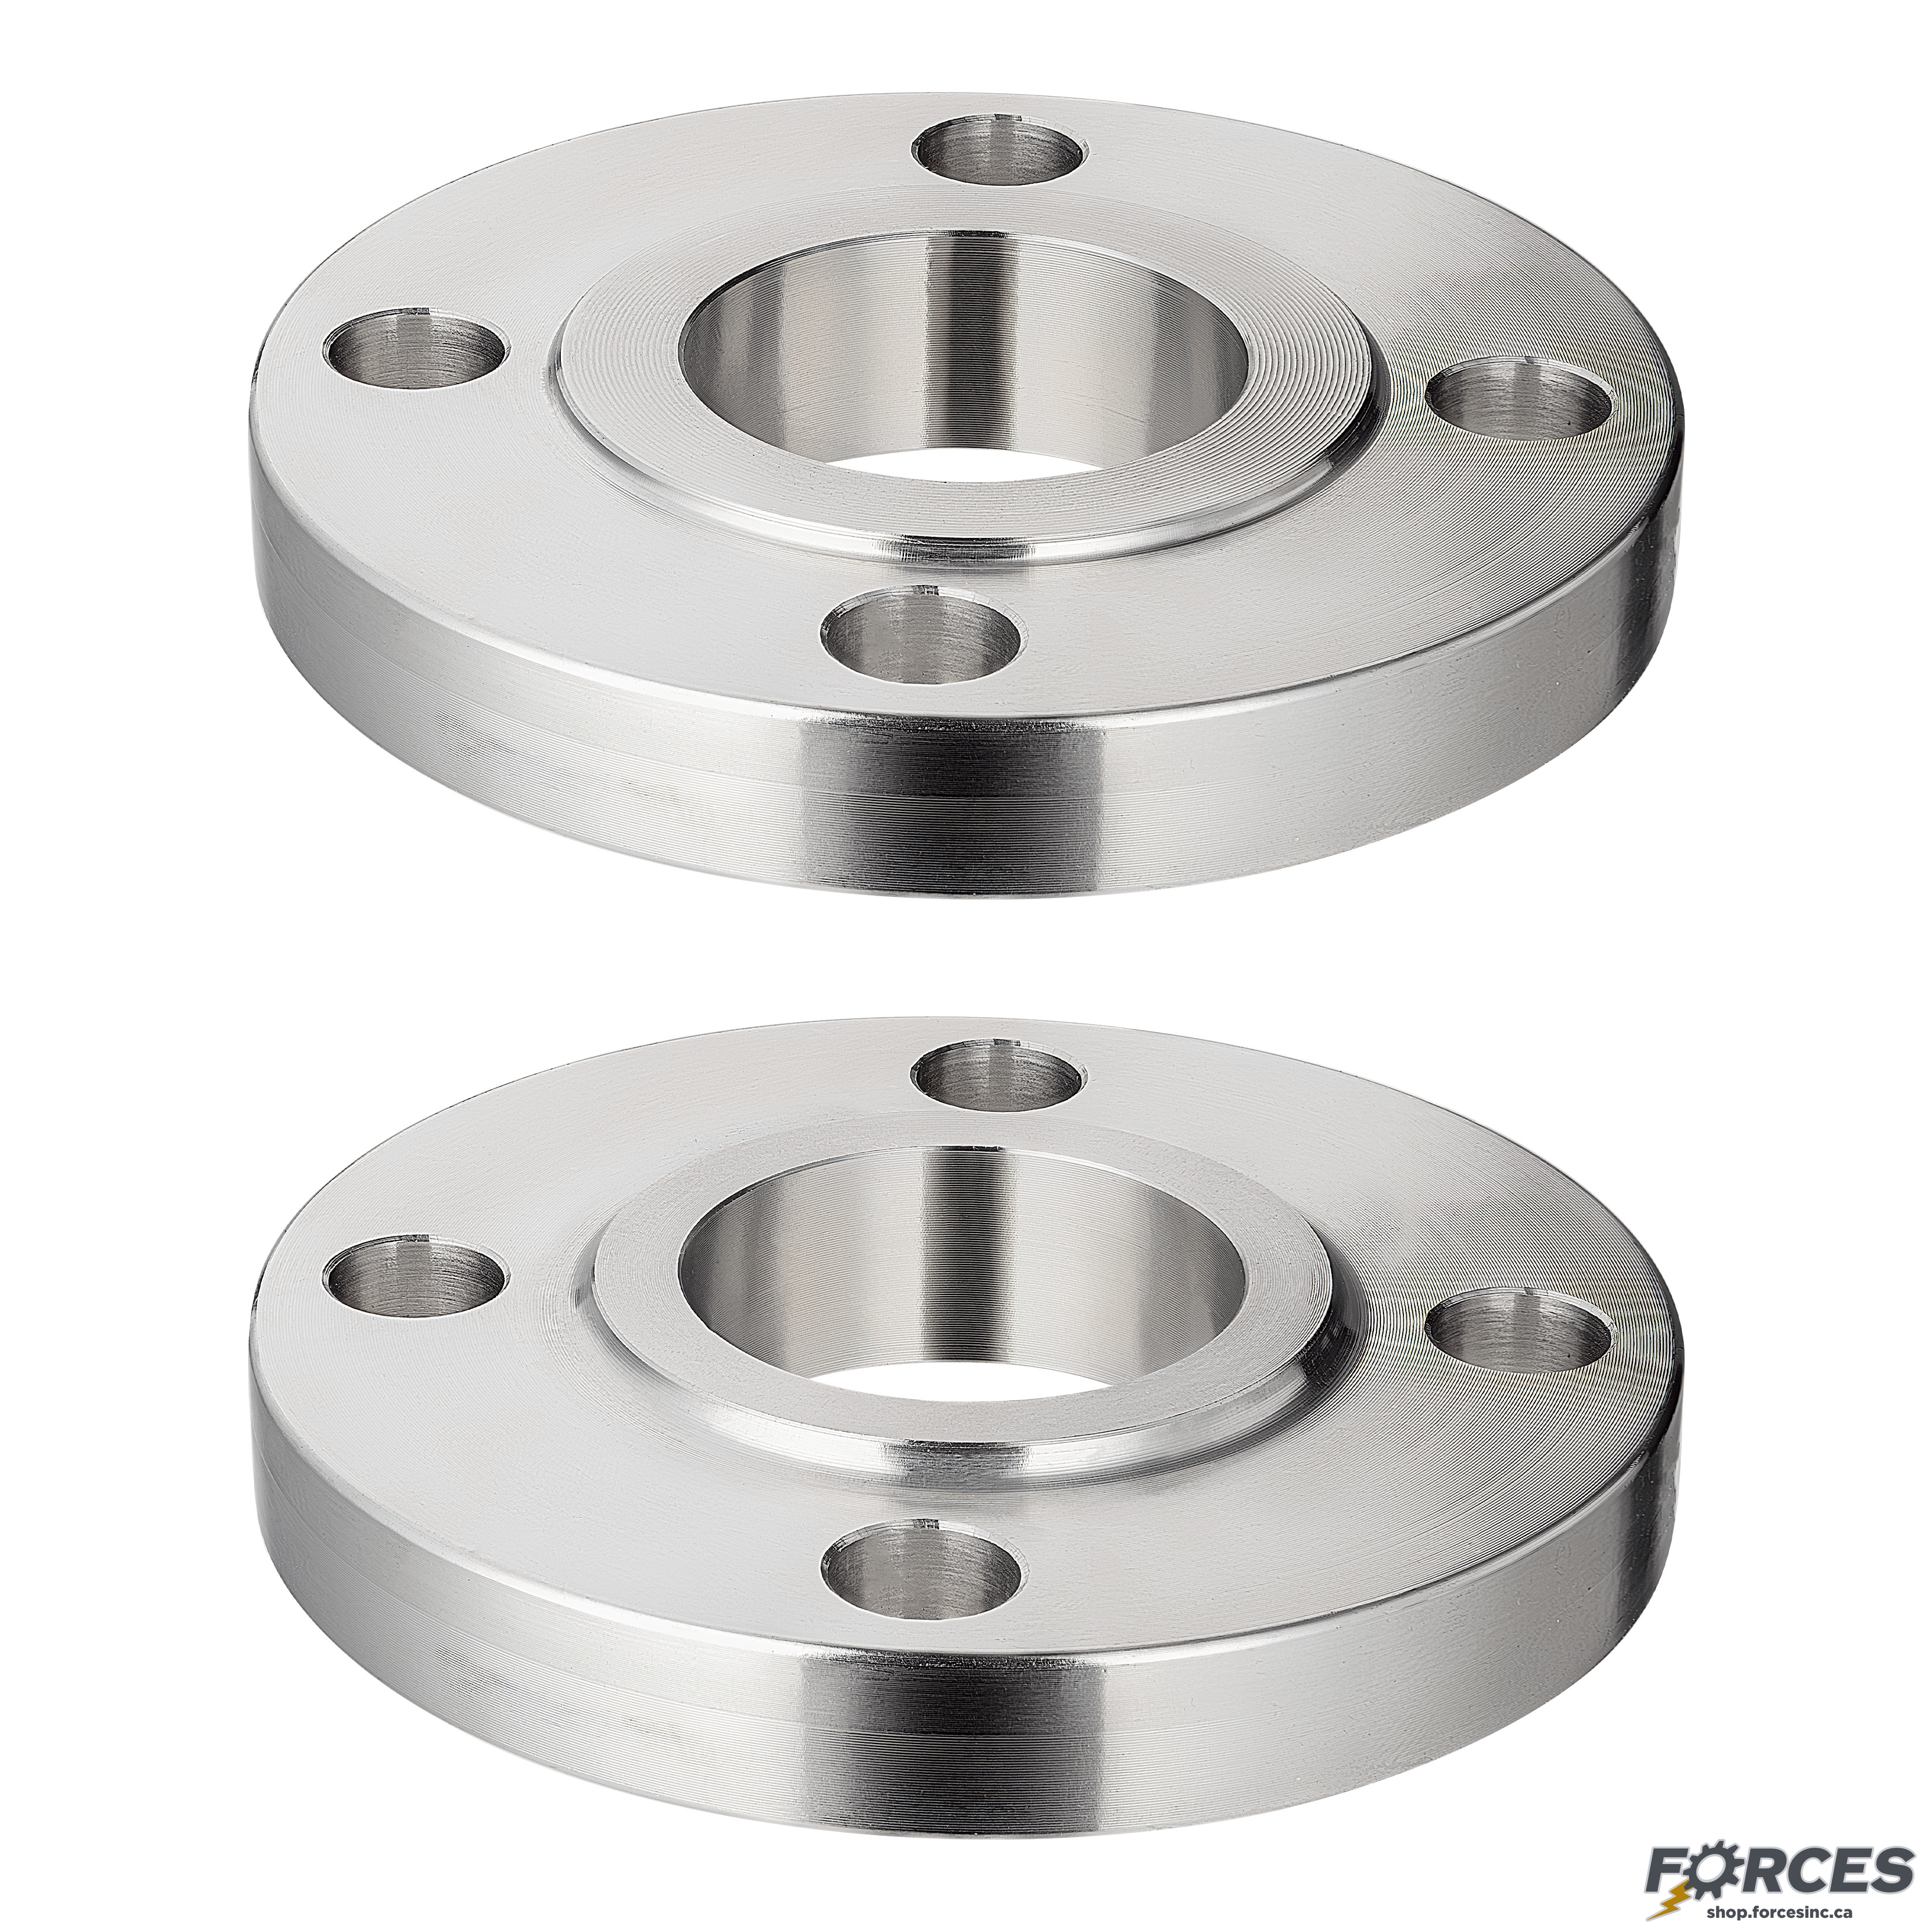 1/2" Slip-On Flange Class #150 - Stainless Steel 316 - Forces Inc